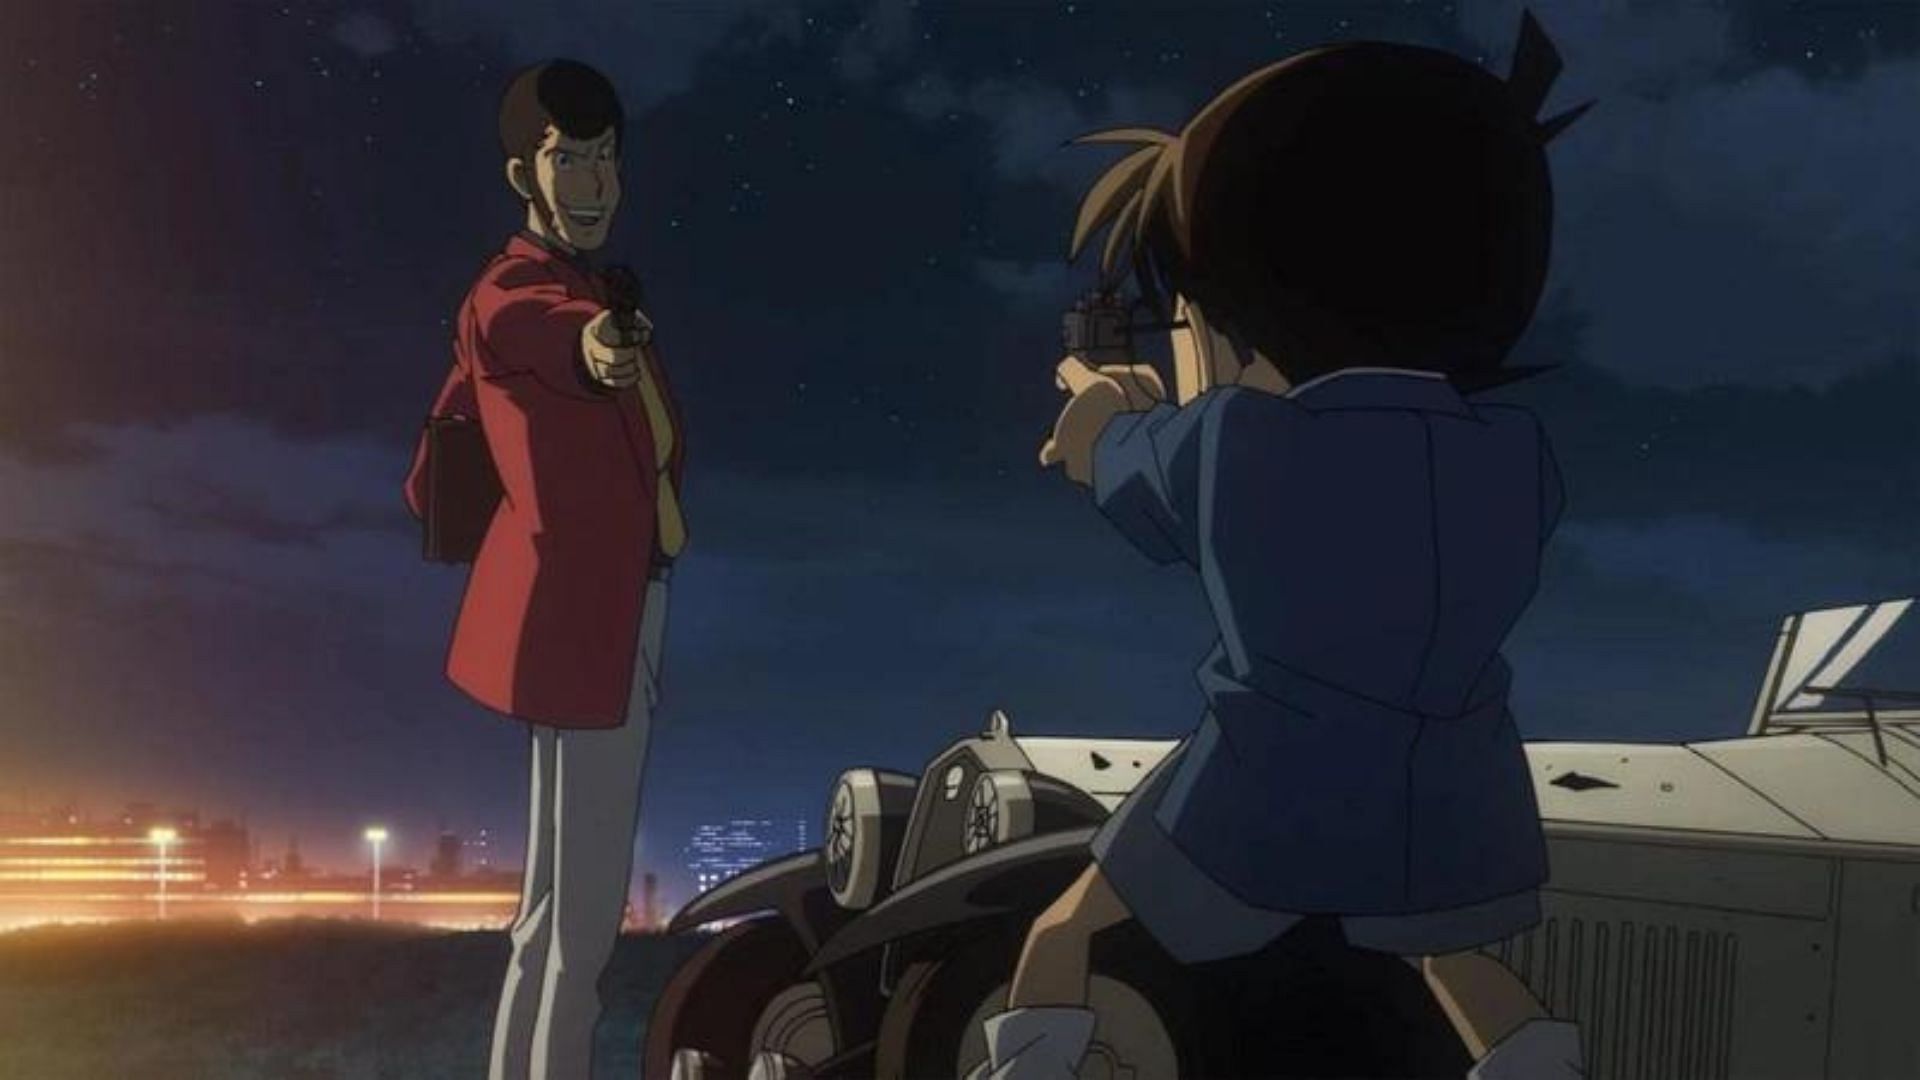 Ars&egrave;ne Lupin III and Conan Edogawa as seen in Lupin the 3rd vs. Detective Conan (Image via TMS Entertainment)